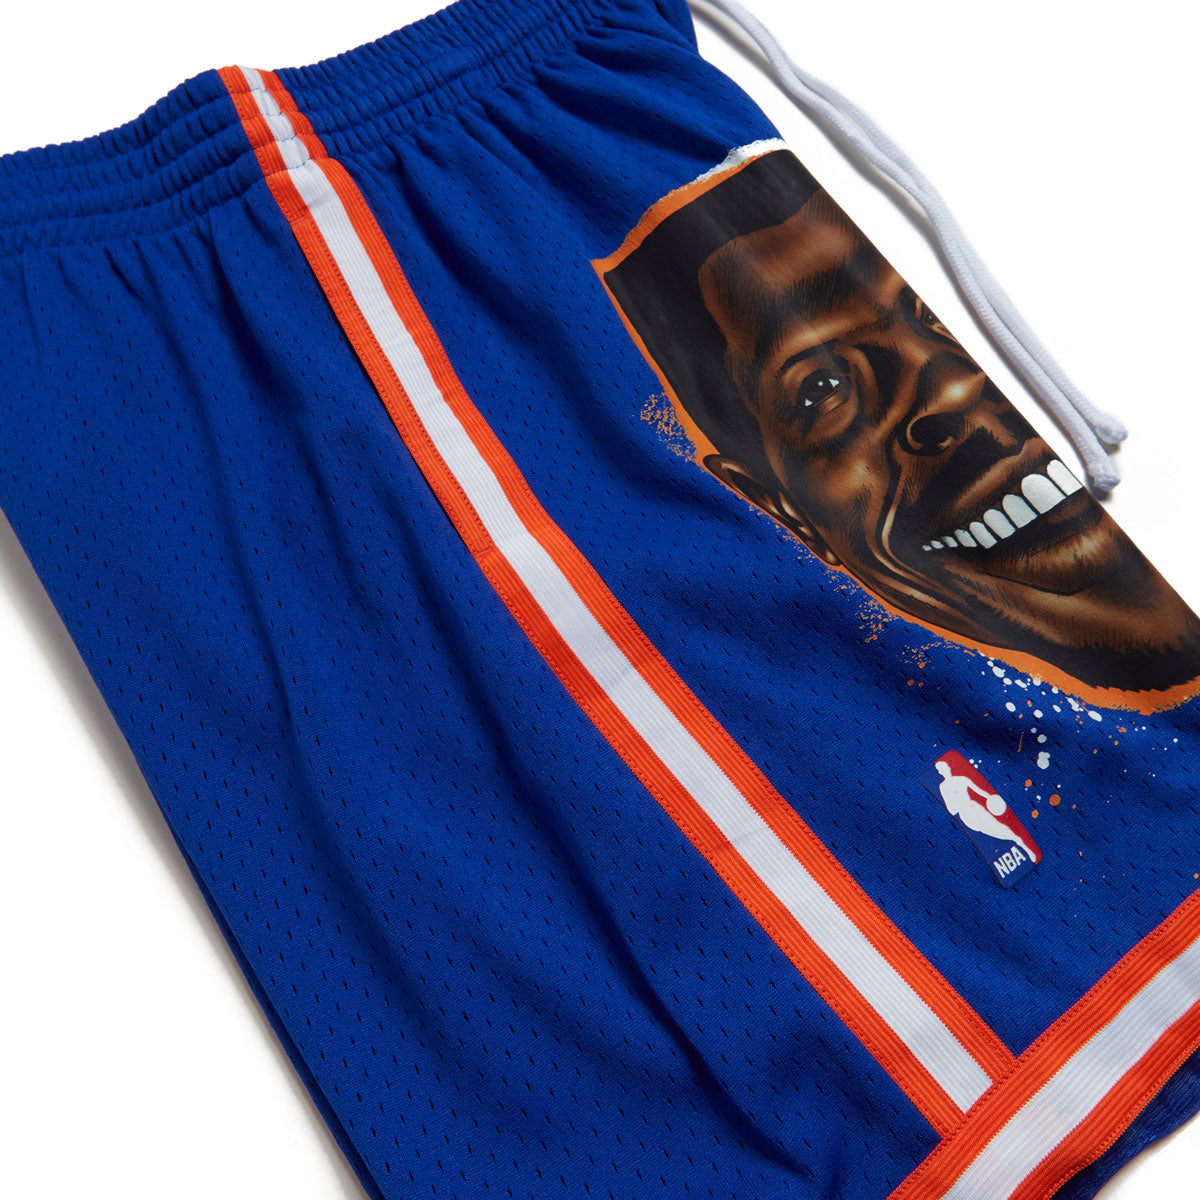 Basketball Shorts - Deck out in Authentic NBA Shorts with pockets